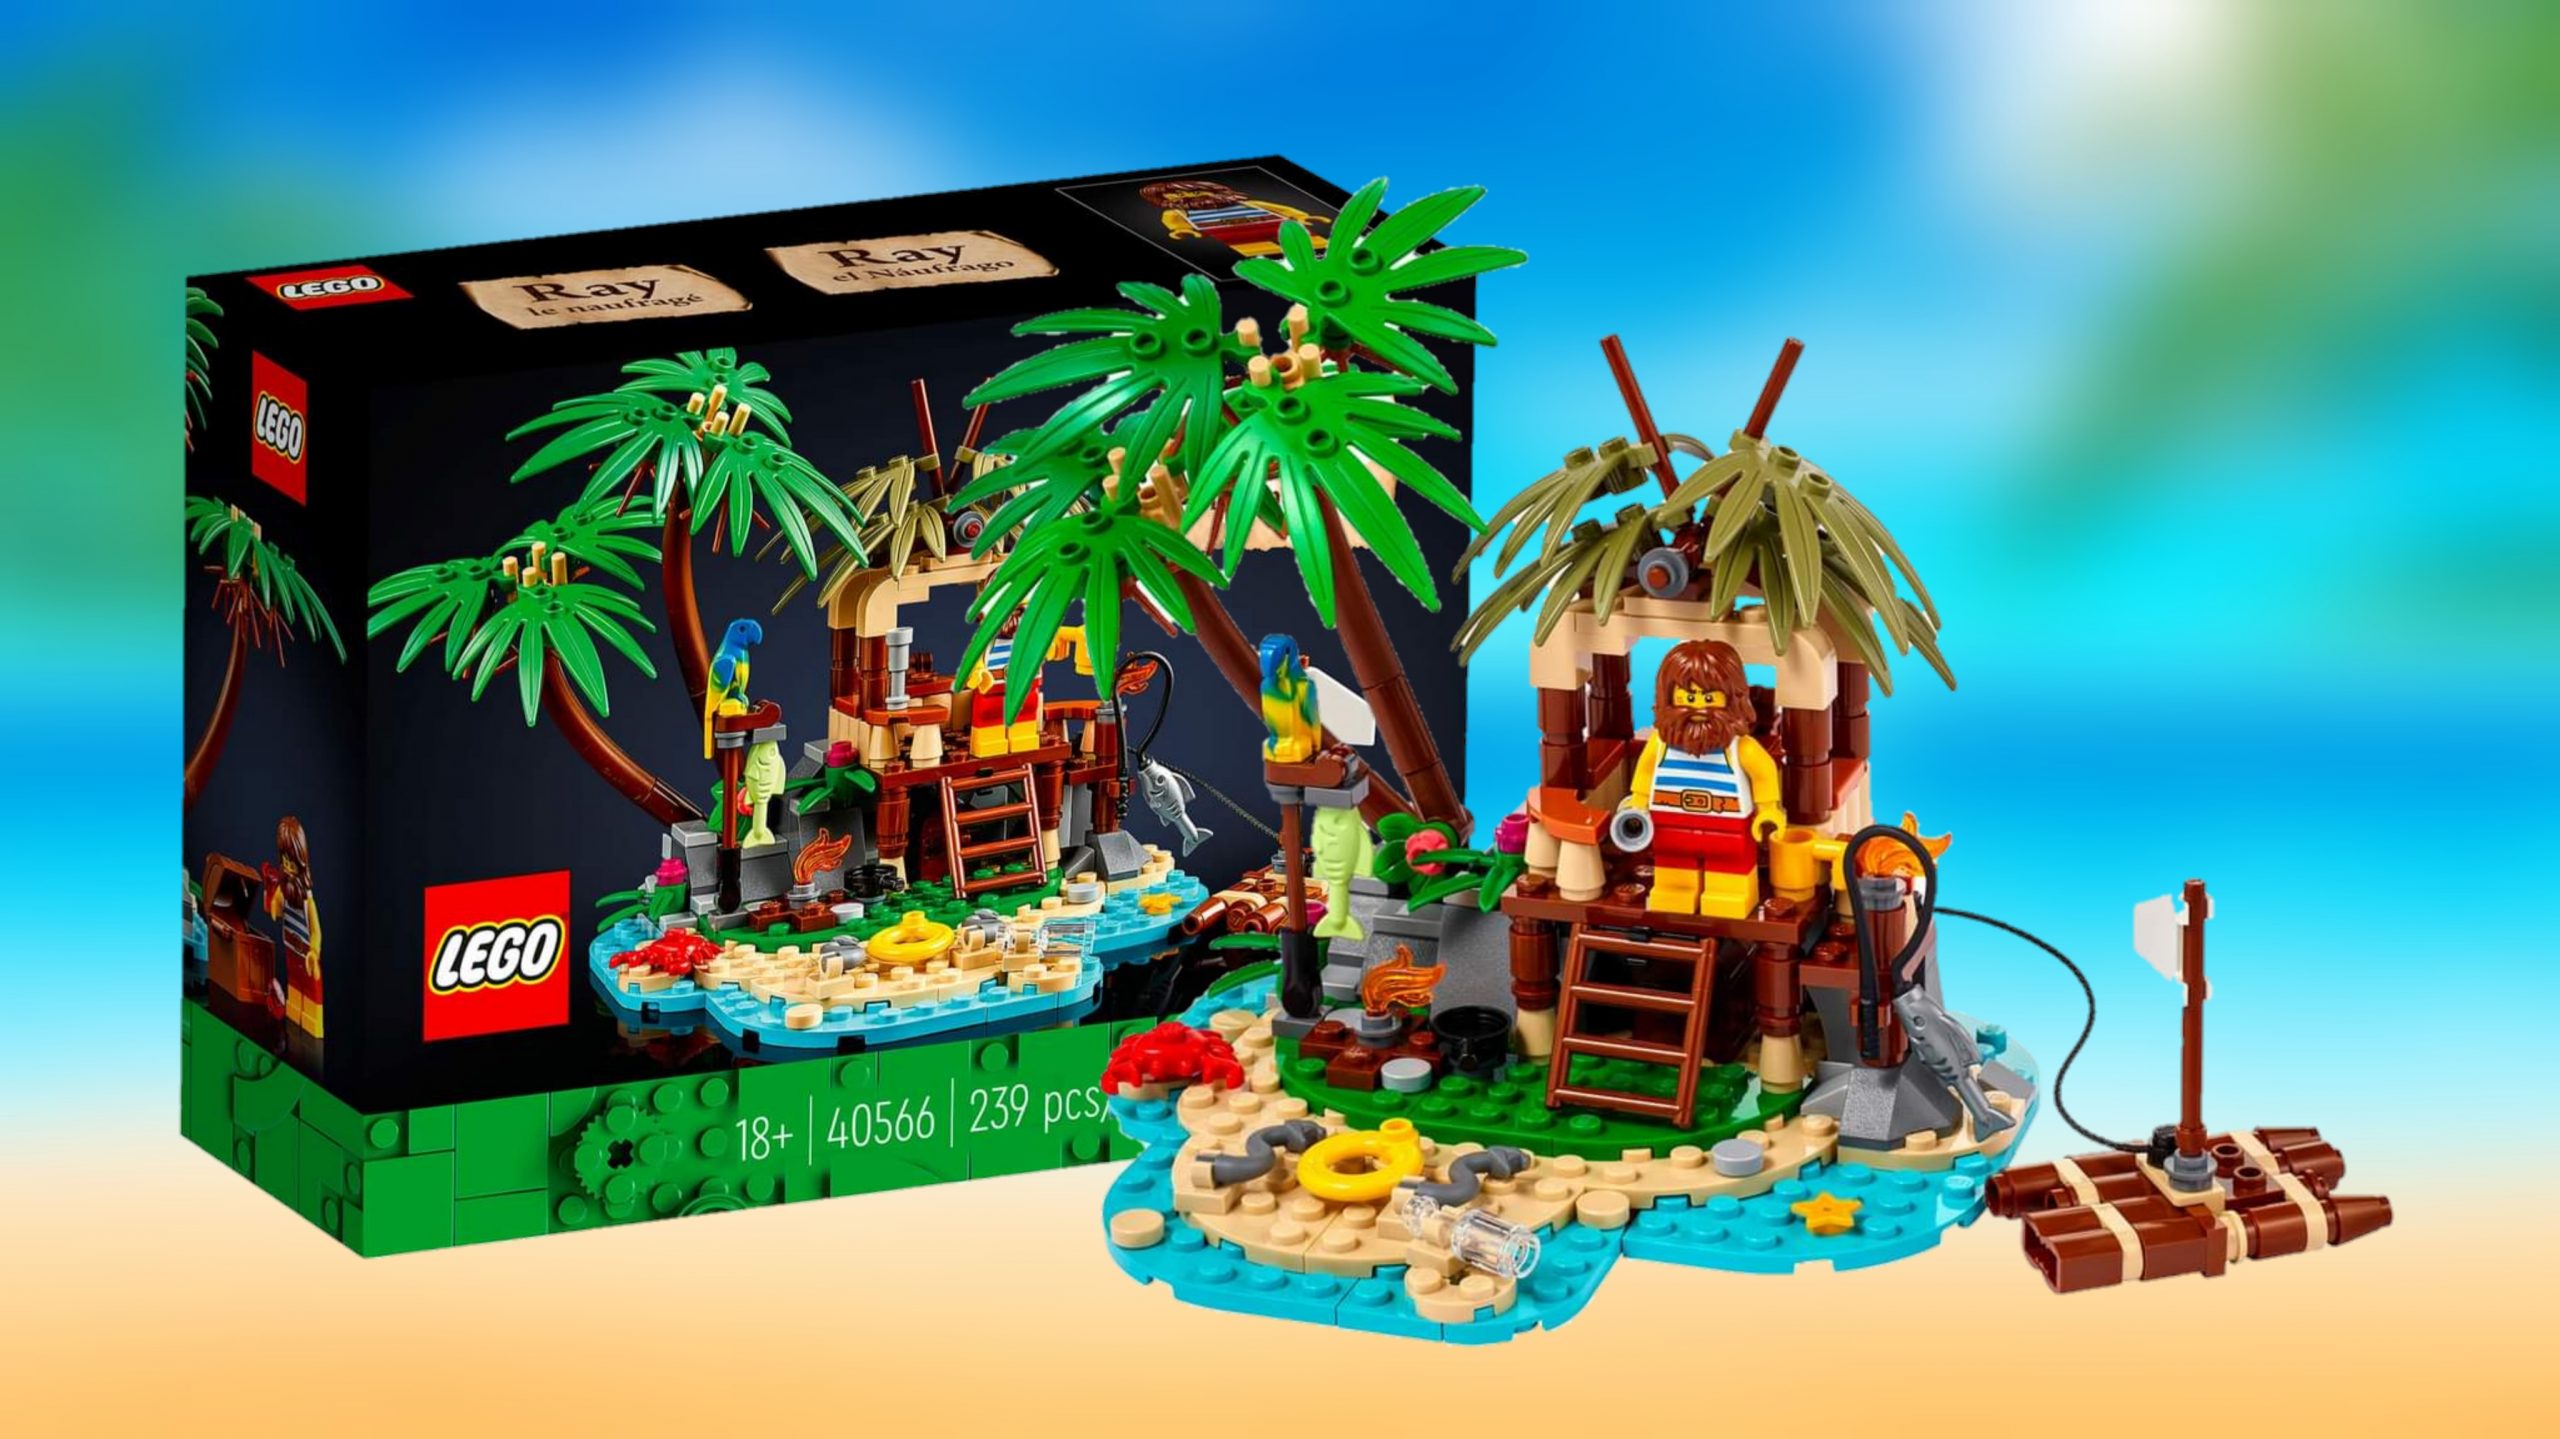 LEGO Ray the Castaway 40566 GWP The Brick Post!